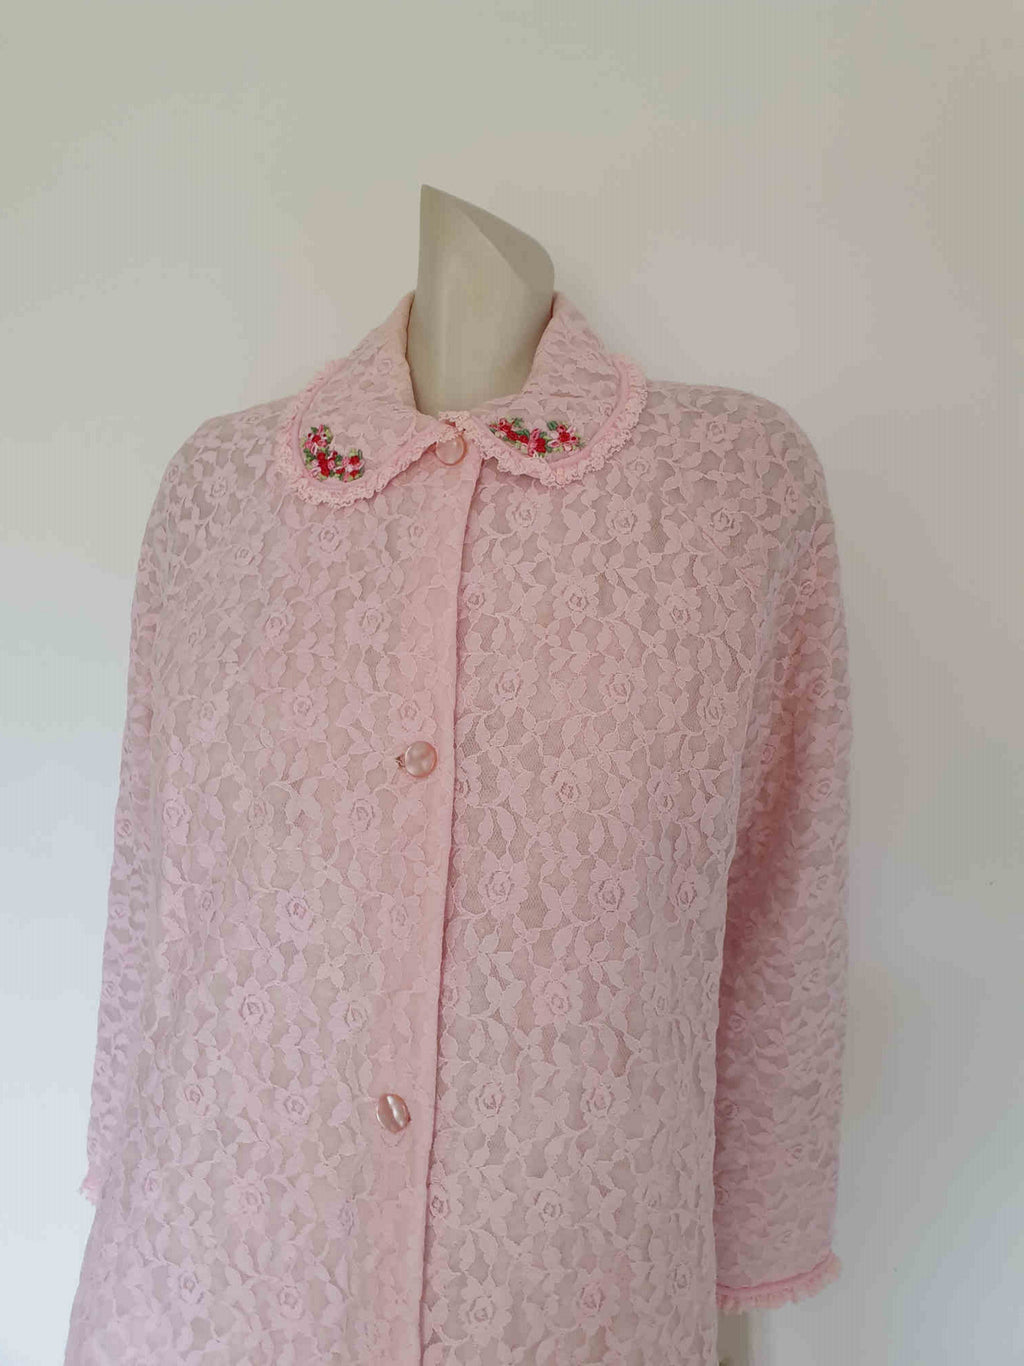 1960s vintage pink nylon quilted lace dressing gown or robe